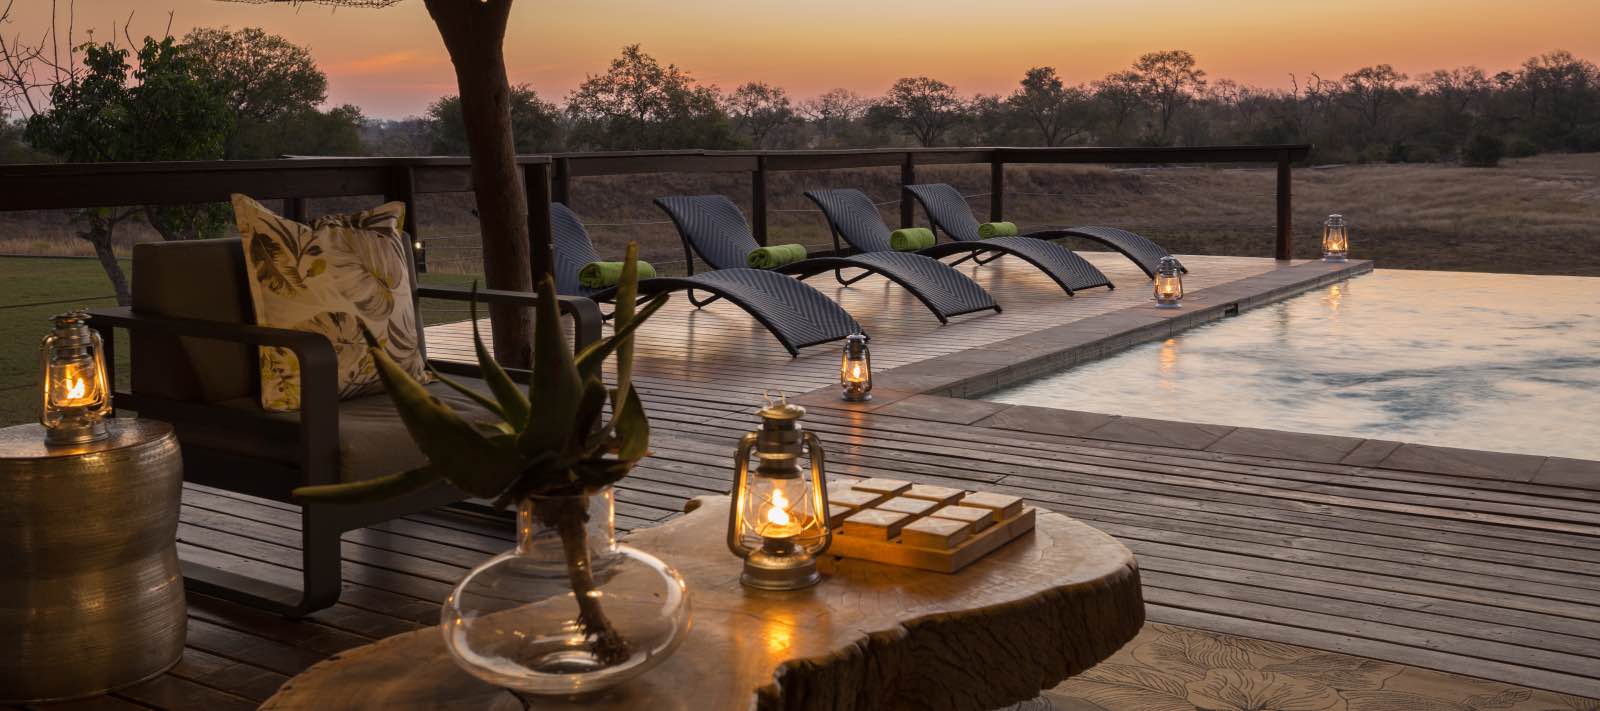 Sunset at the infinity pool, watching the activity on the open plain at Arathusa Safari Lodge